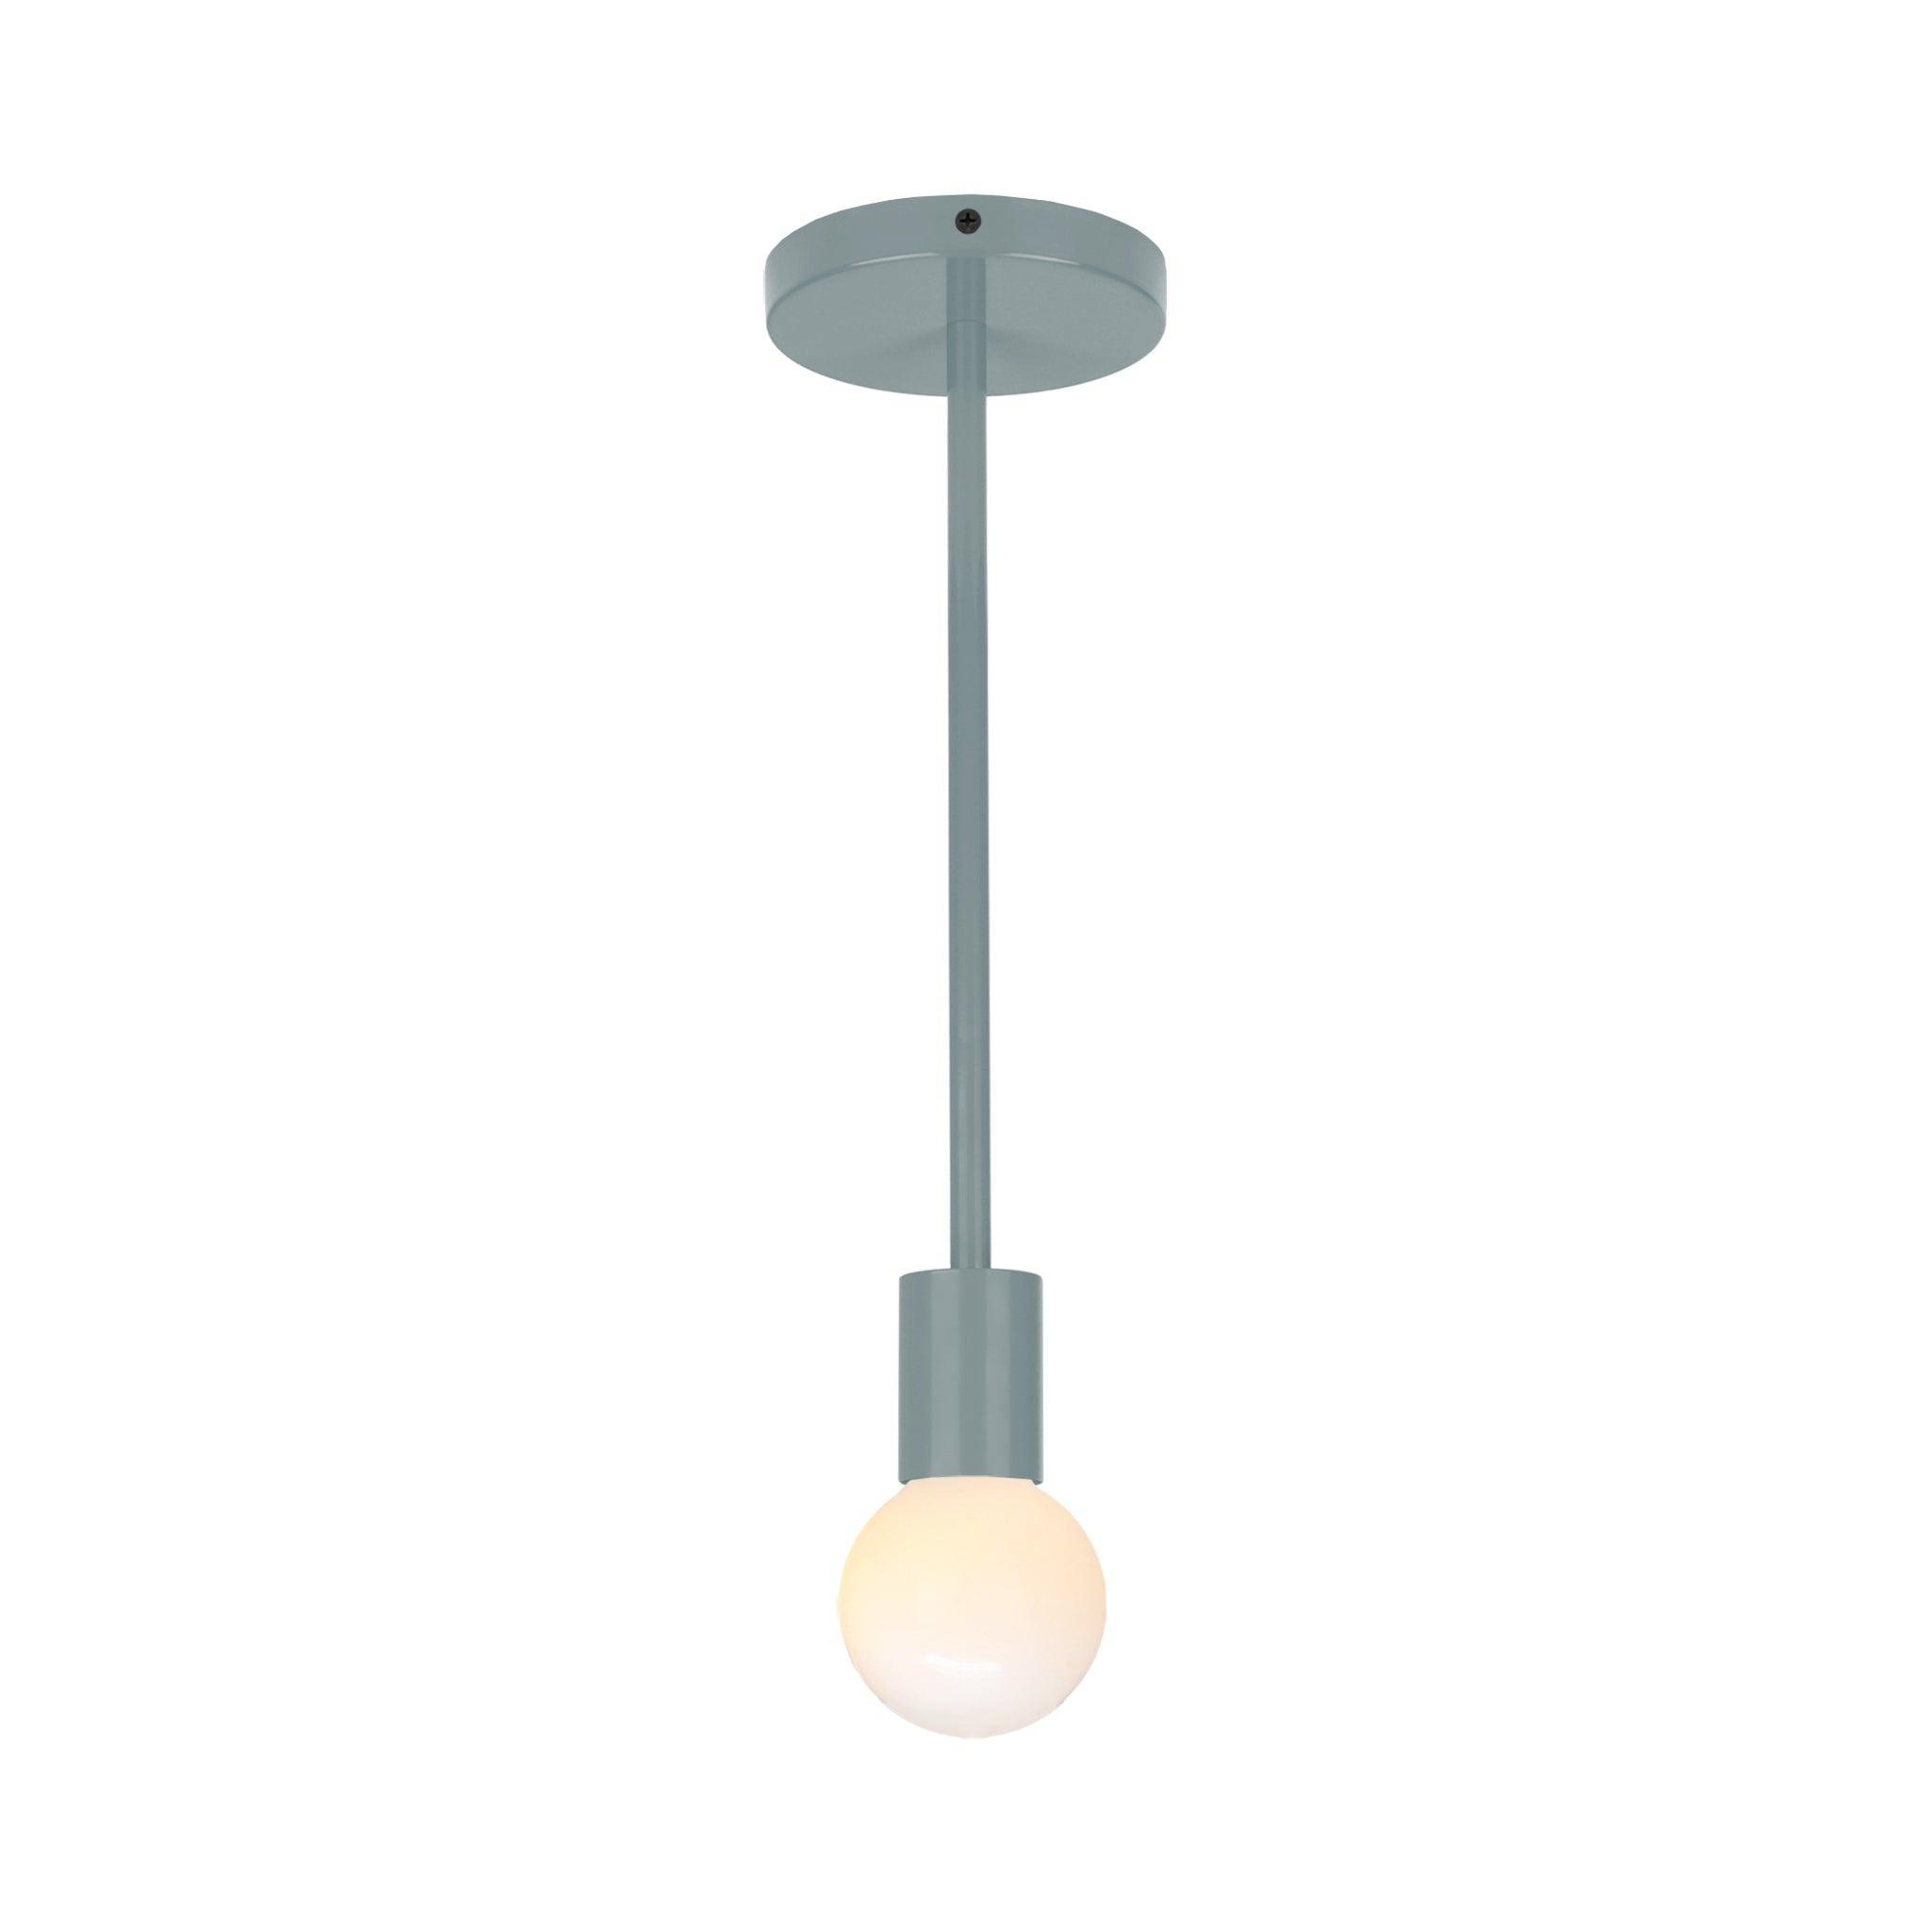 Black and lagoon color Twink pendant Dutton Brown lighting